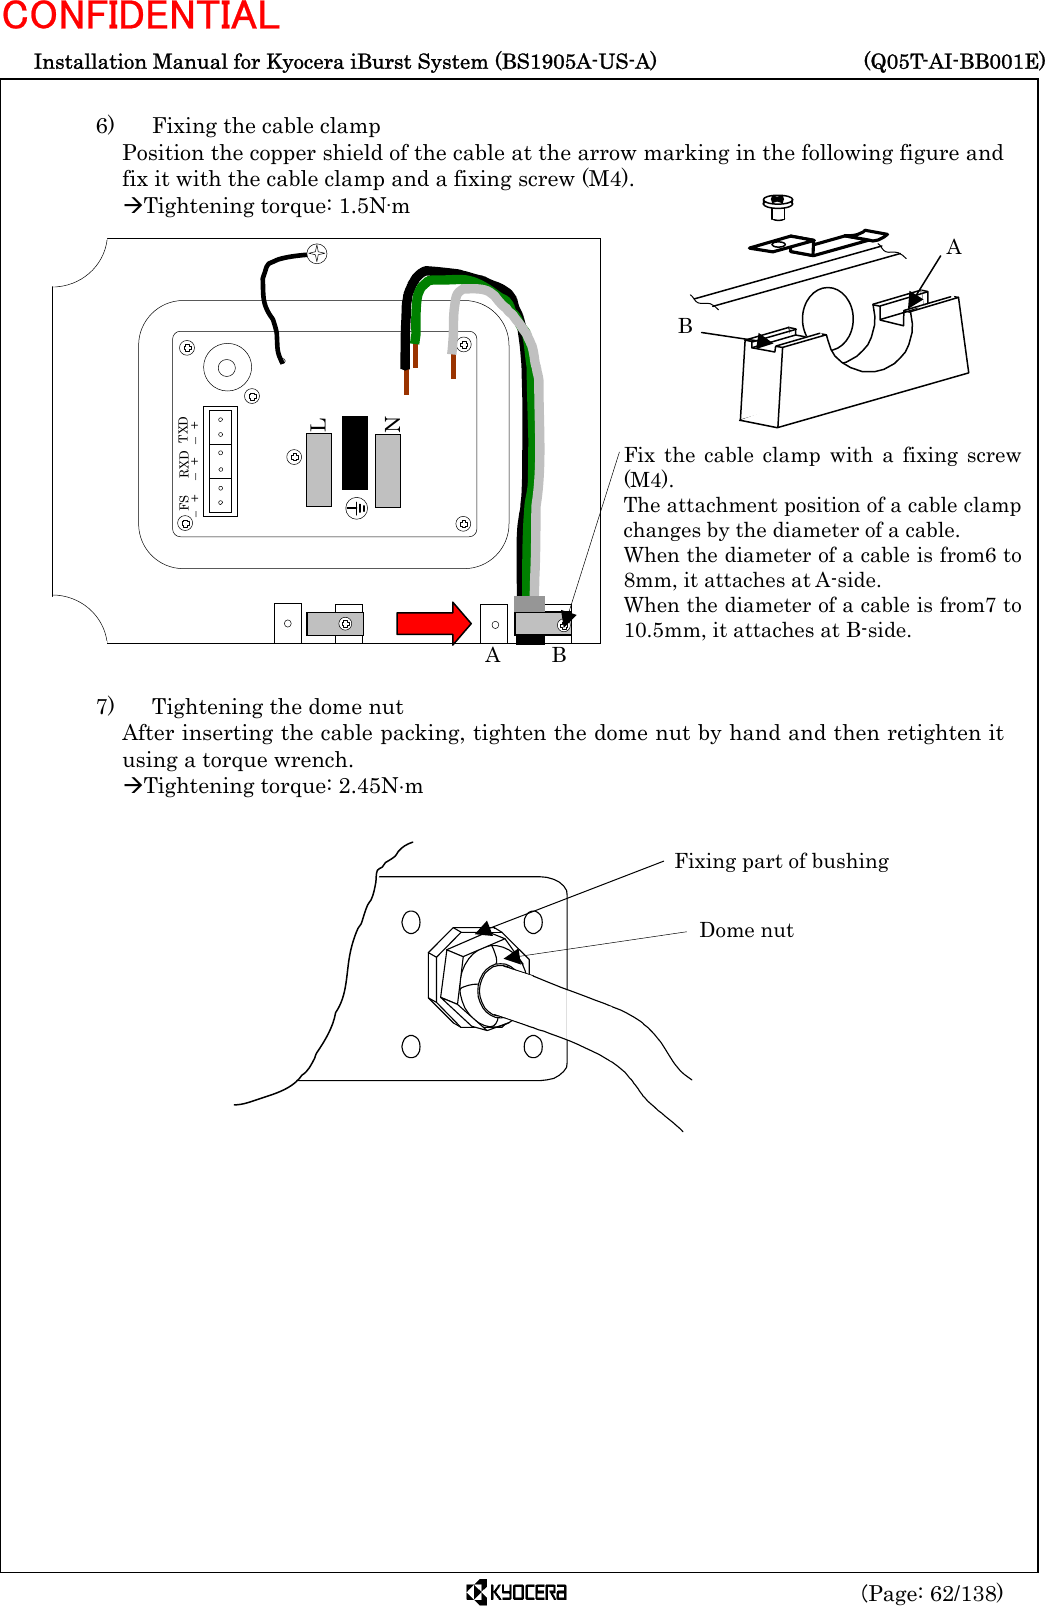  Installation Manual for Kyocera iBurst System (BS1905A-US-A)     (Q05T-AI-BB001E) (Page: 62/138) CONFIDENTIAL  6)    Fixing the cable clamp Position the copper shield of the cable at the arrow marking in the following figure and fix it with the cable clamp and a fixing screw (M4). ÆTightening torque: 1.5N·m                   7)    Tightening the dome nut After inserting the cable packing, tighten the dome nut by hand and then retighten it using a torque wrench. ÆTightening torque: 2.45N⋅m                              Dome nut Fixing part of bushing L N   FS – + RXD – +  TXD – + Fix the cable clamp with a fixing screw(M4). The attachment position of a cable clampchanges by the diameter of a cable. When the diameter of a cable is from6 to8mm, it attaches at A-side. When the diameter of a cable is from7 to10.5mm, it attaches at B-side. A     B B A 